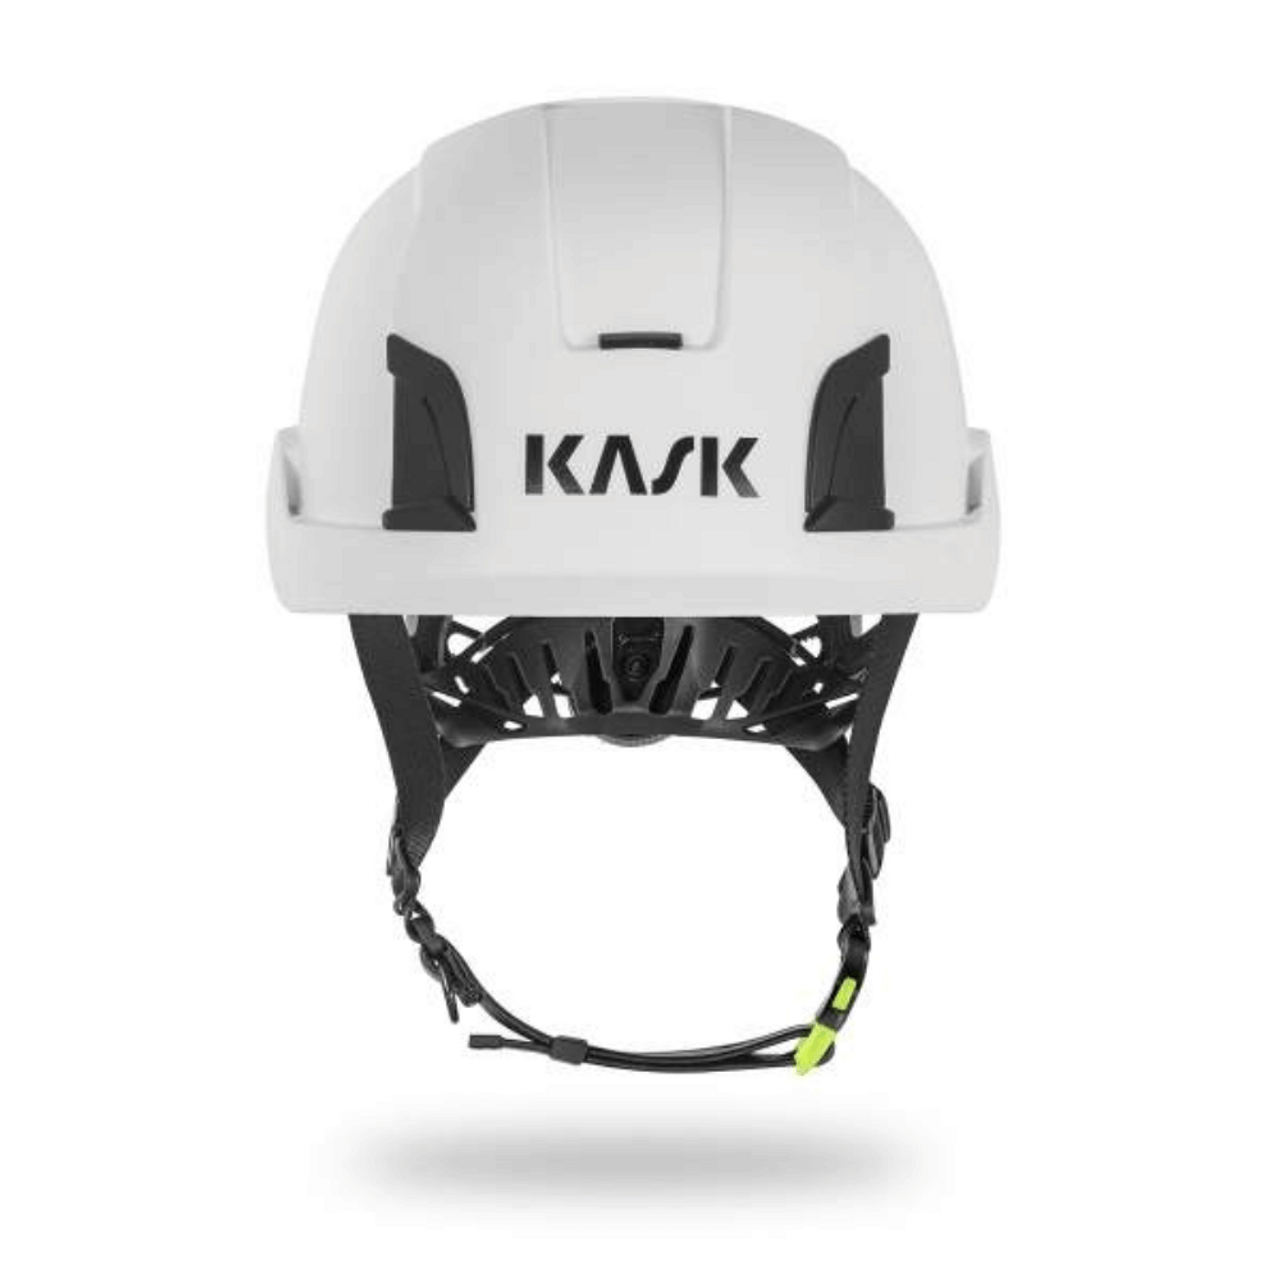 Hard Hat FR Winter Liner, Removable Sections